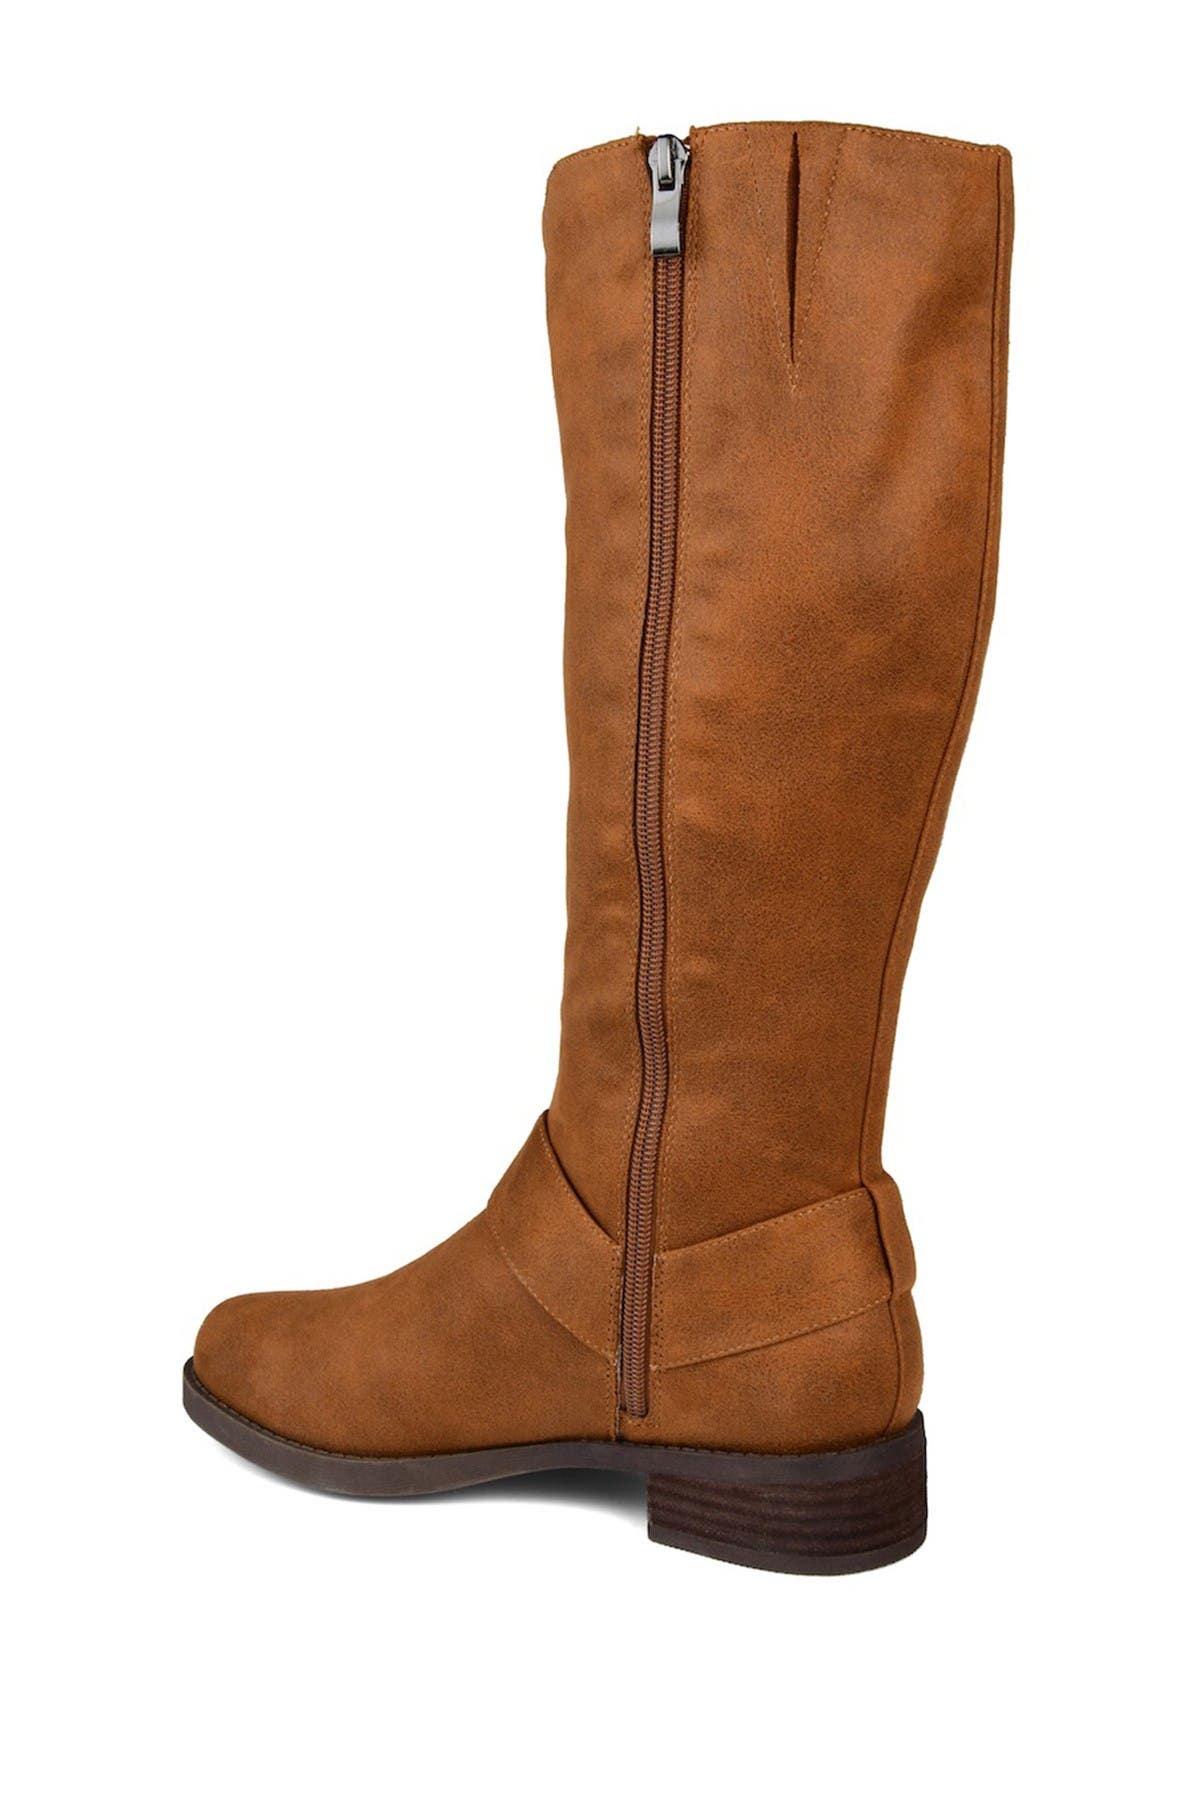 Journee Collection Meg Boot In Rust/copper1